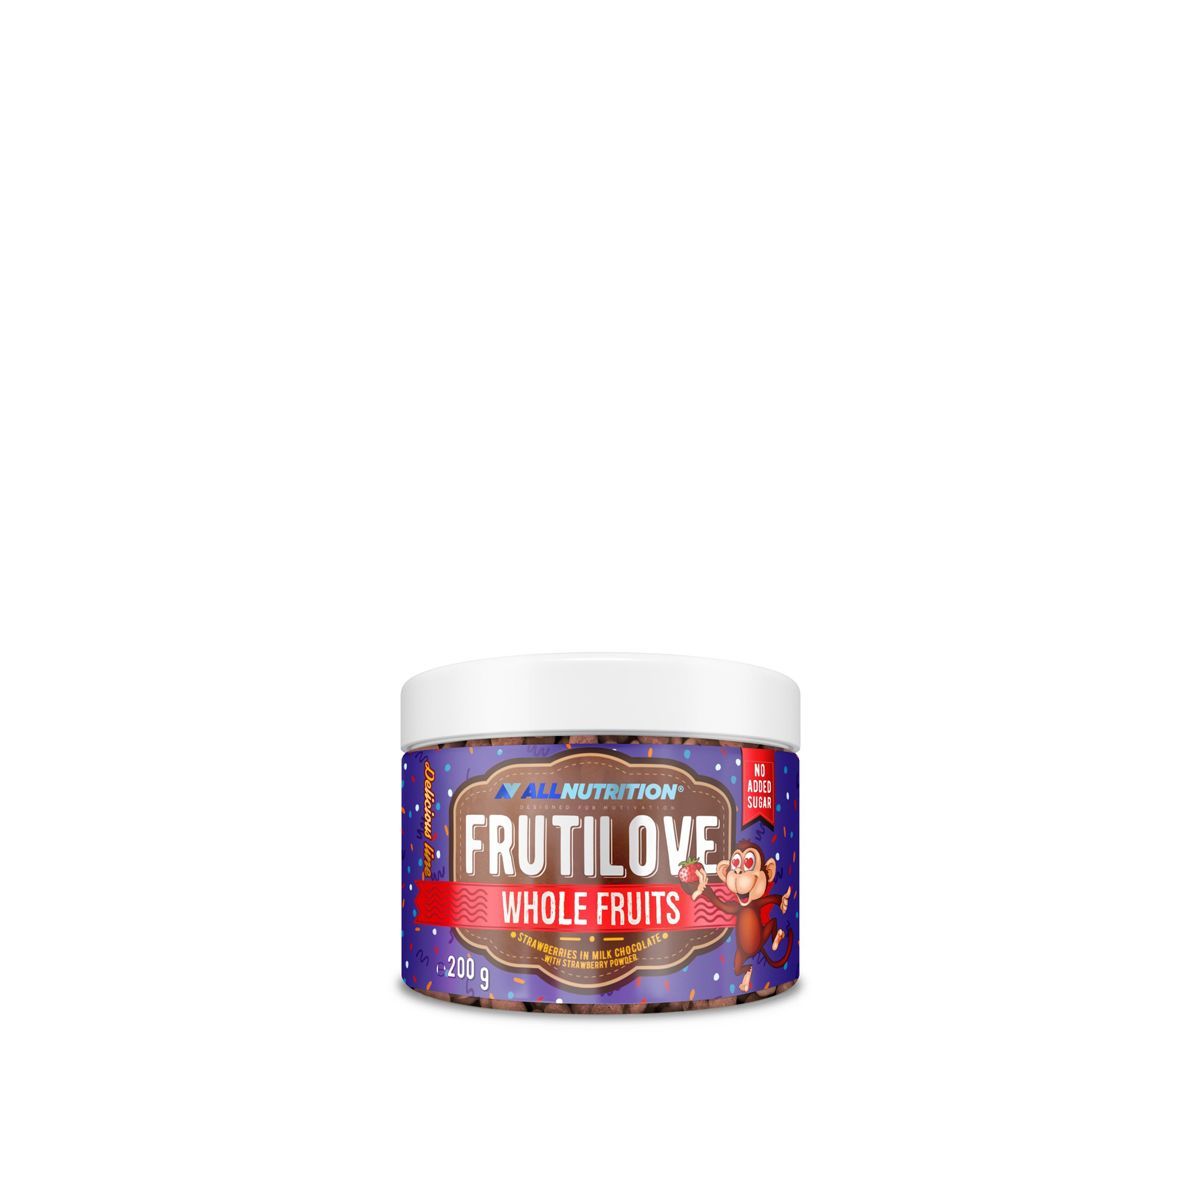 ALLNUTRITION - FRUTILOVE WHOLE FRUITS - STRAWBERRY IN MILK CHOCOLATE WITH STAWBERRY POWDER - 200 G